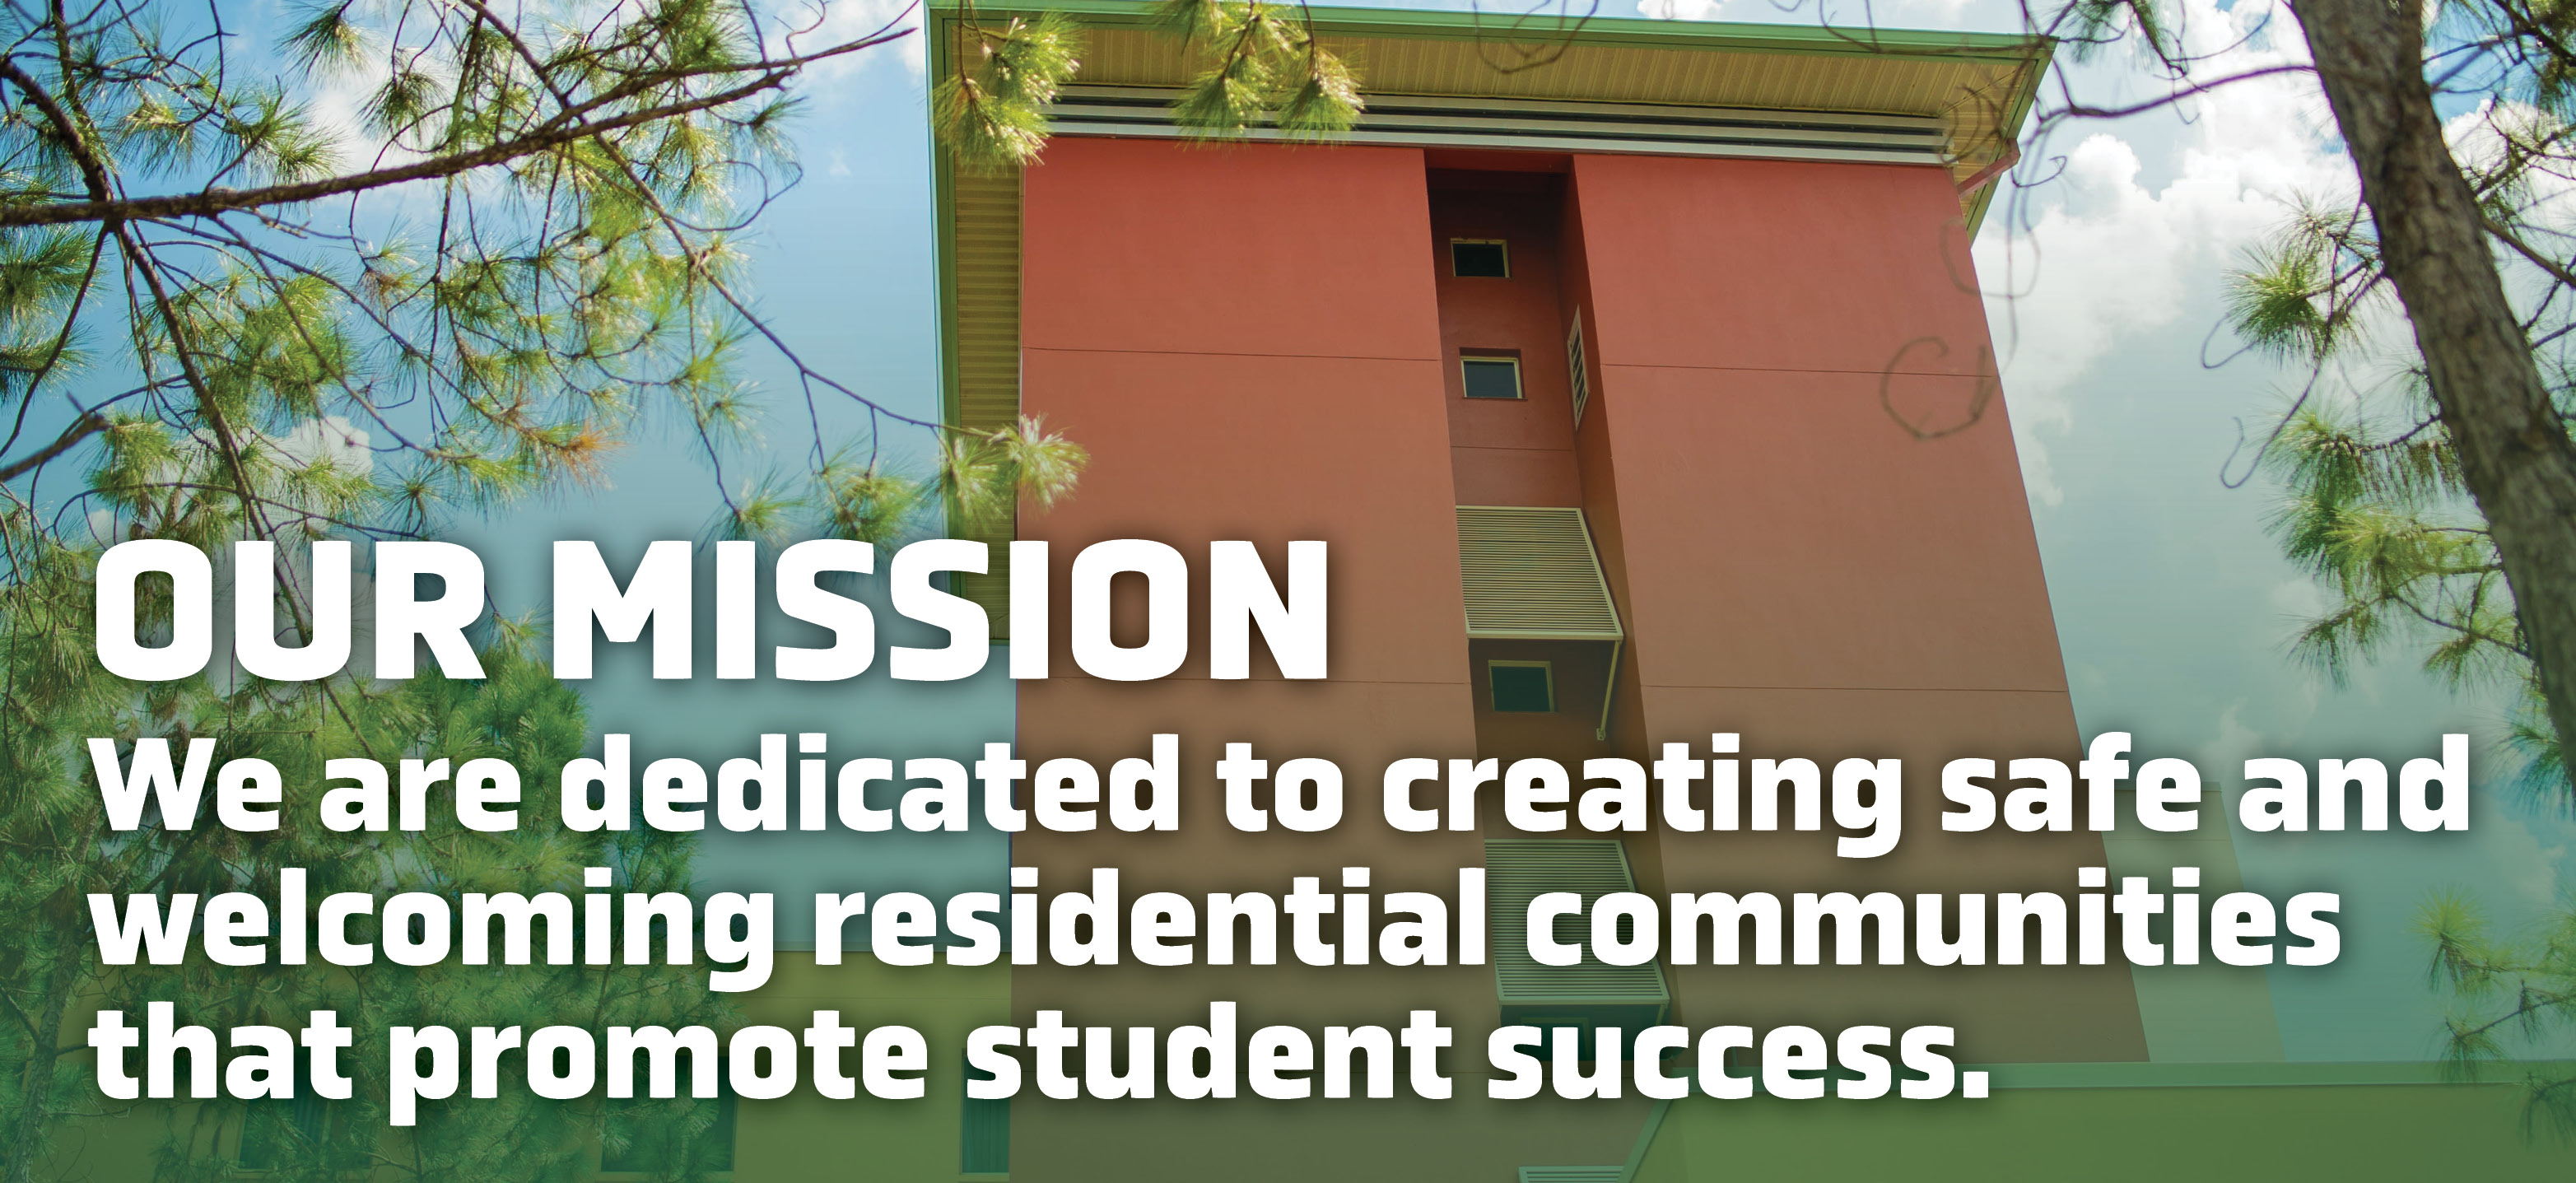 Our Mission: We are dedicated to creating safe and welcoming residential communities that promote student success.